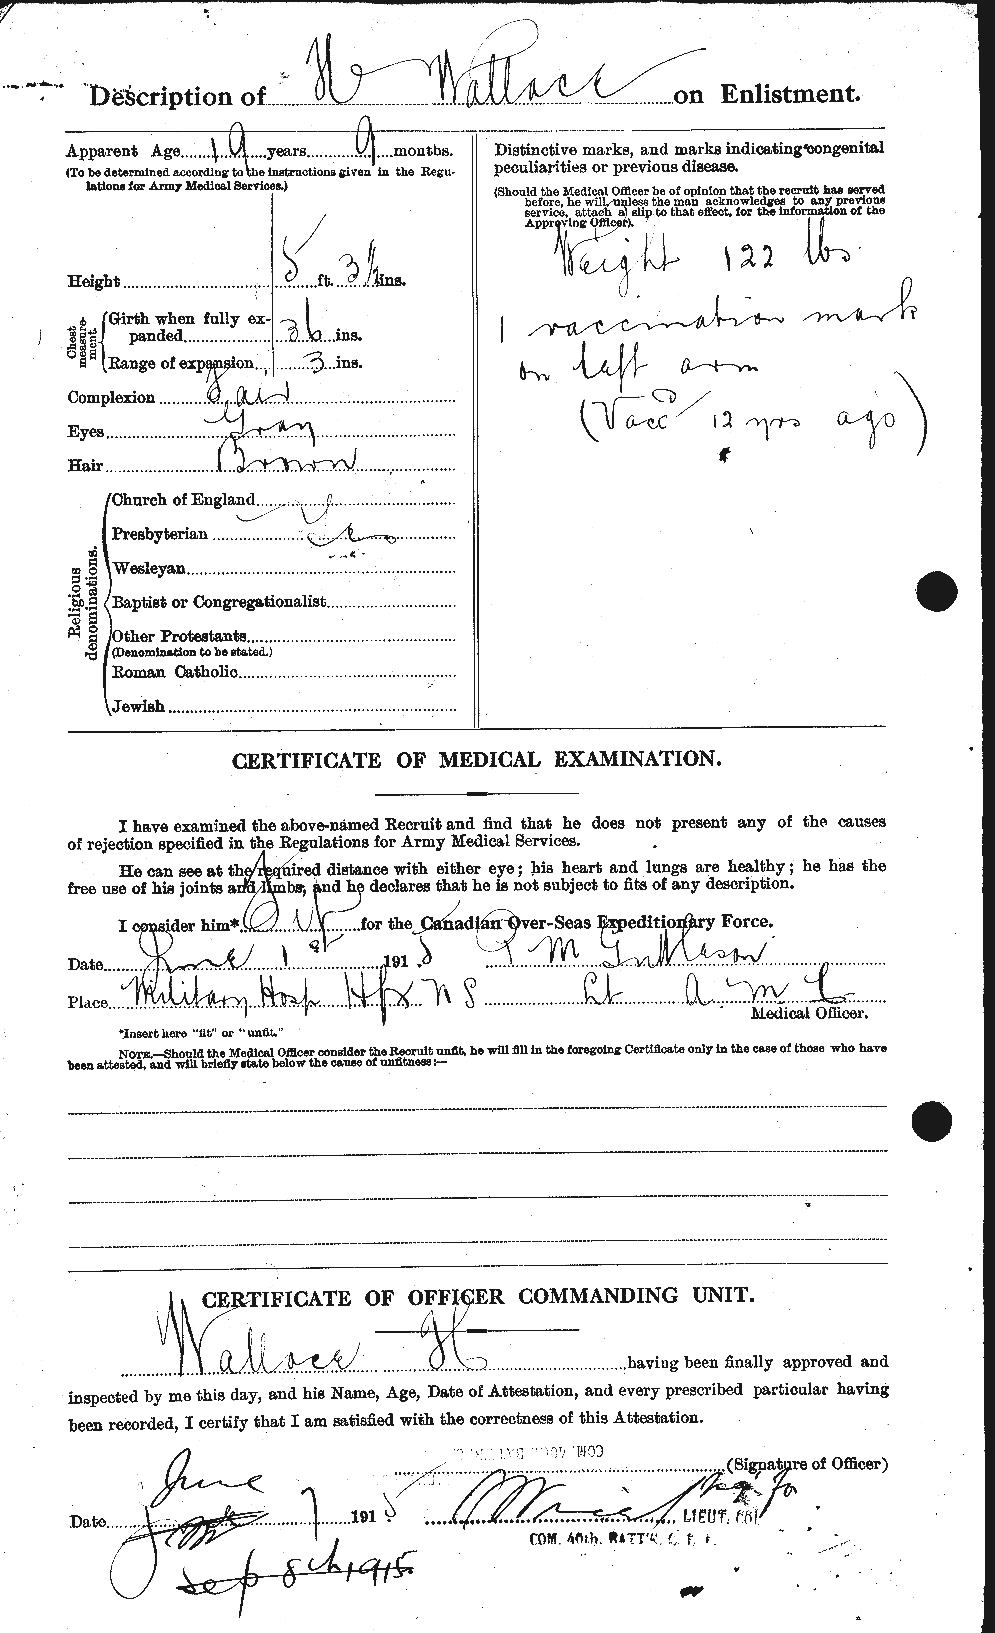 Personnel Records of the First World War - CEF 654472b